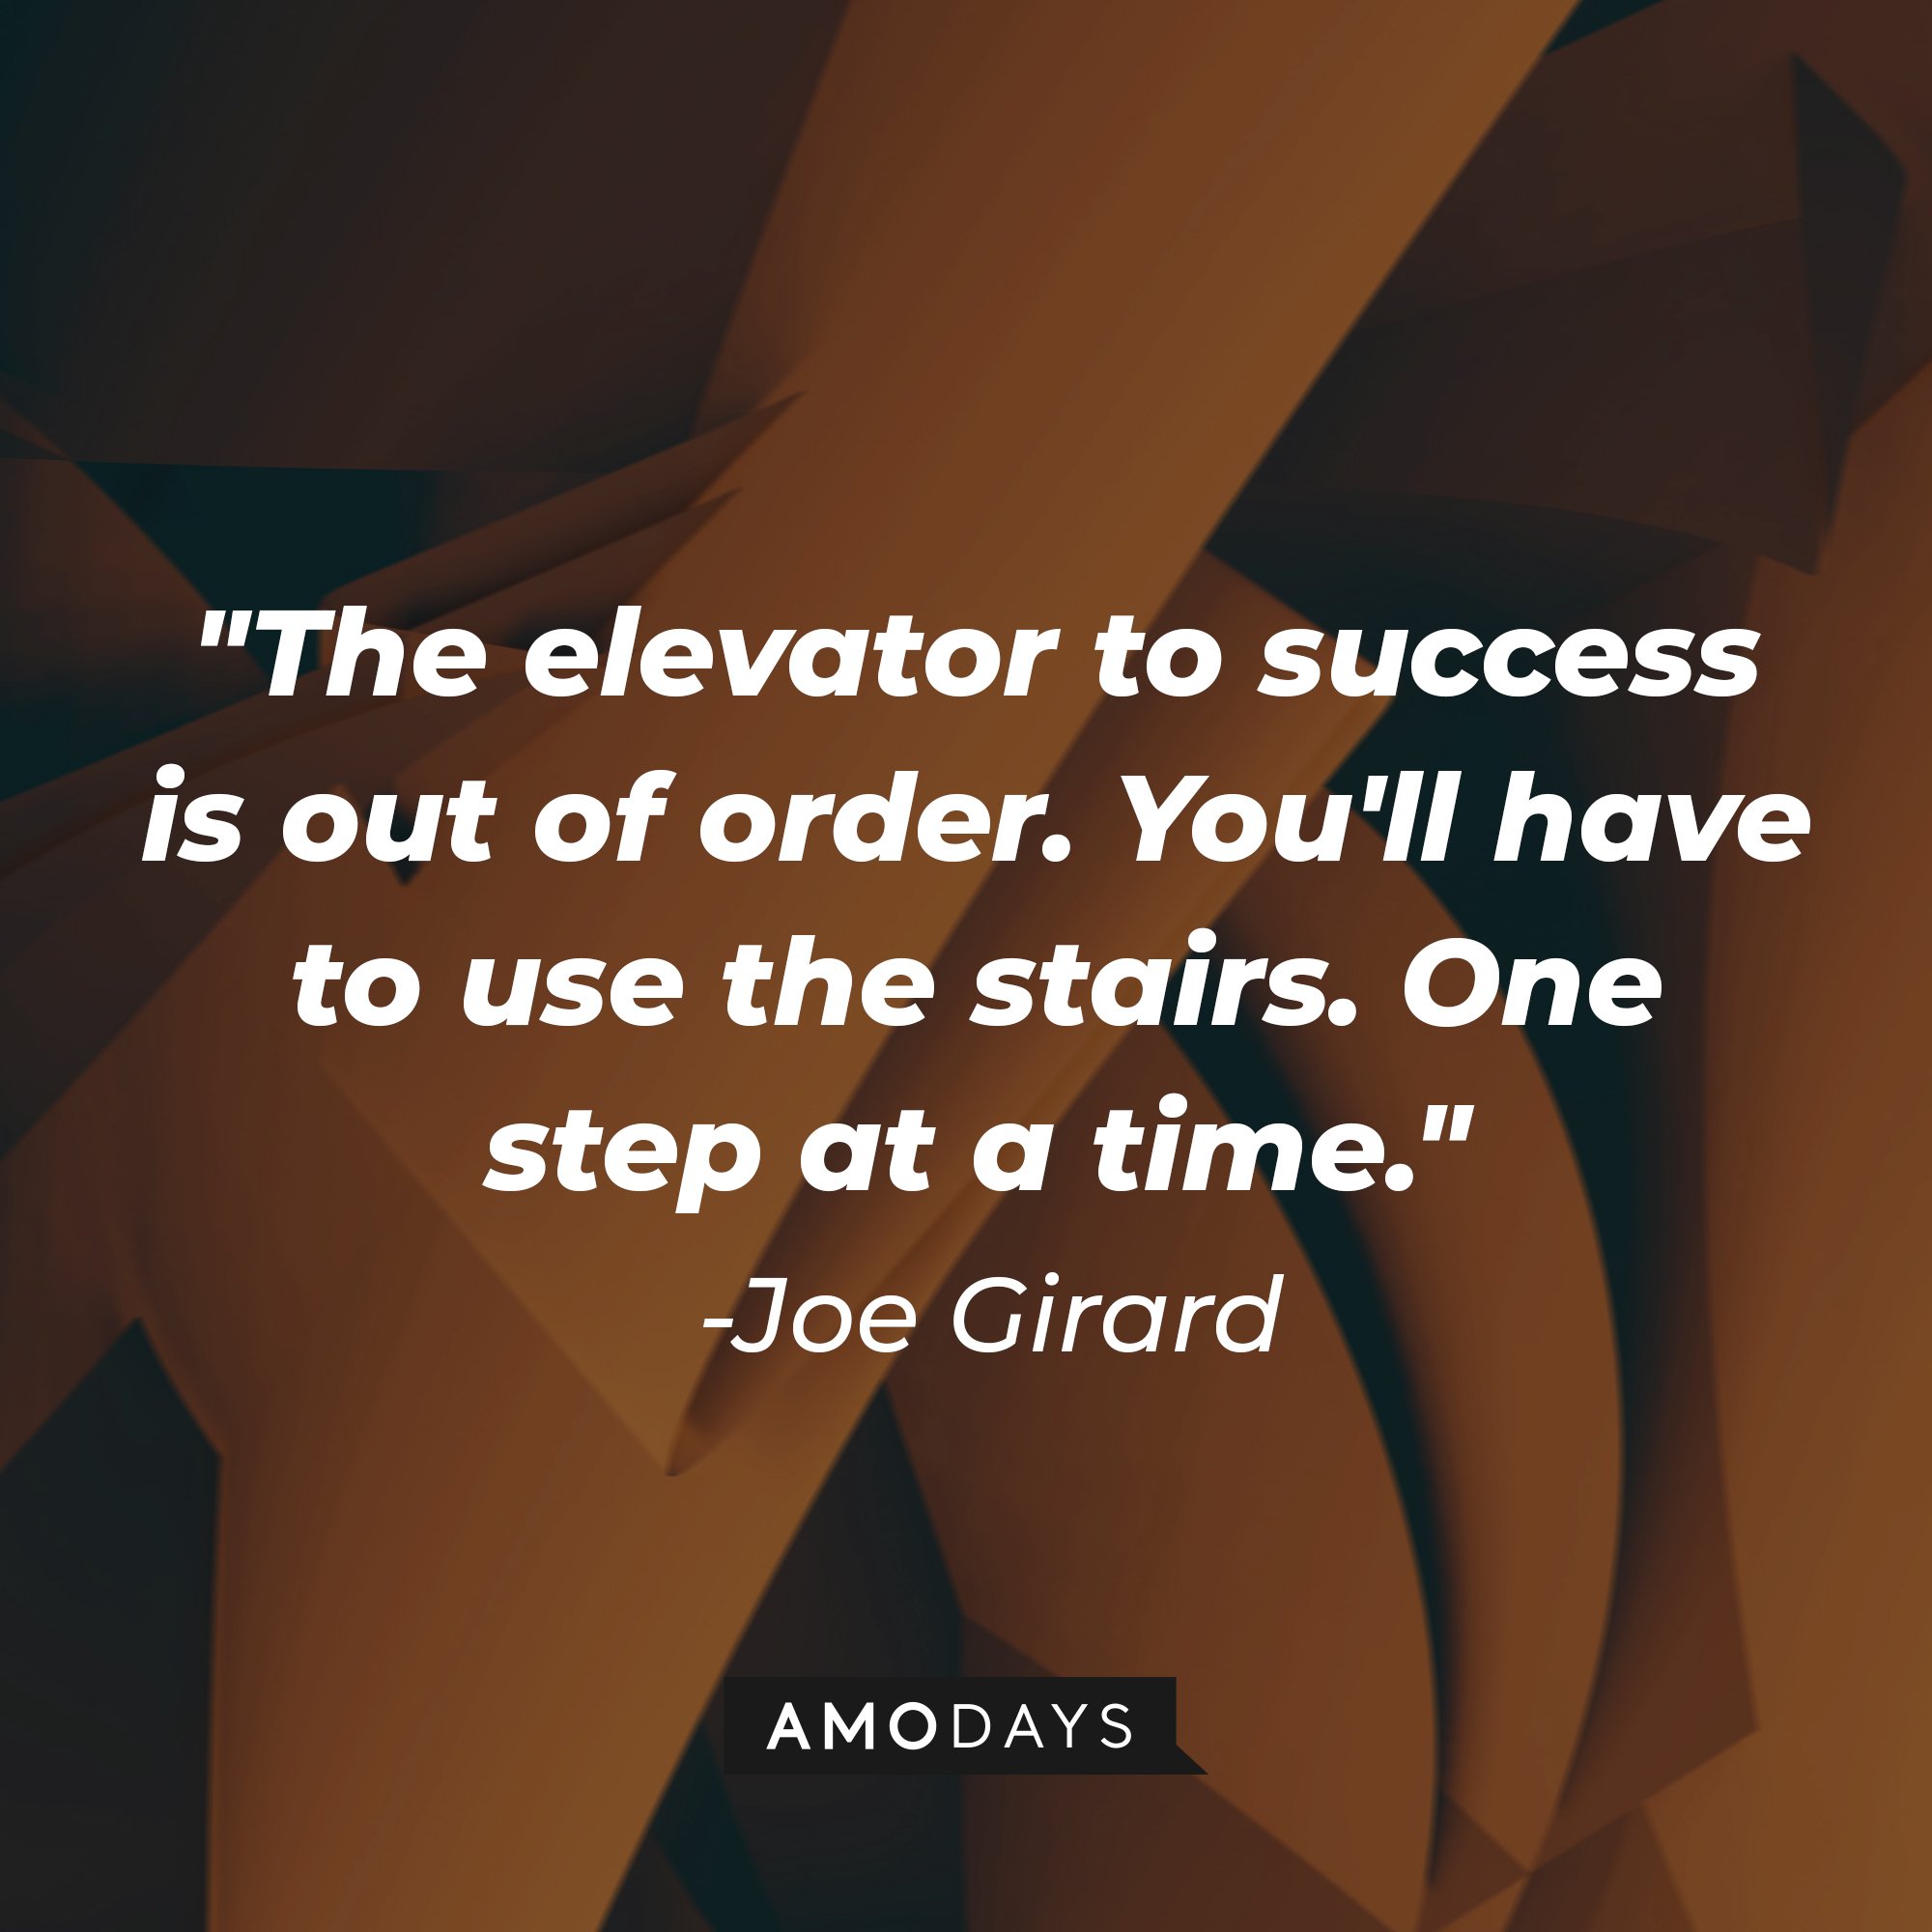 Joe Girard’s quote: "The elevator to success is out of order. You'll have to use the stairs. One step at a time." | Image: AmoDays